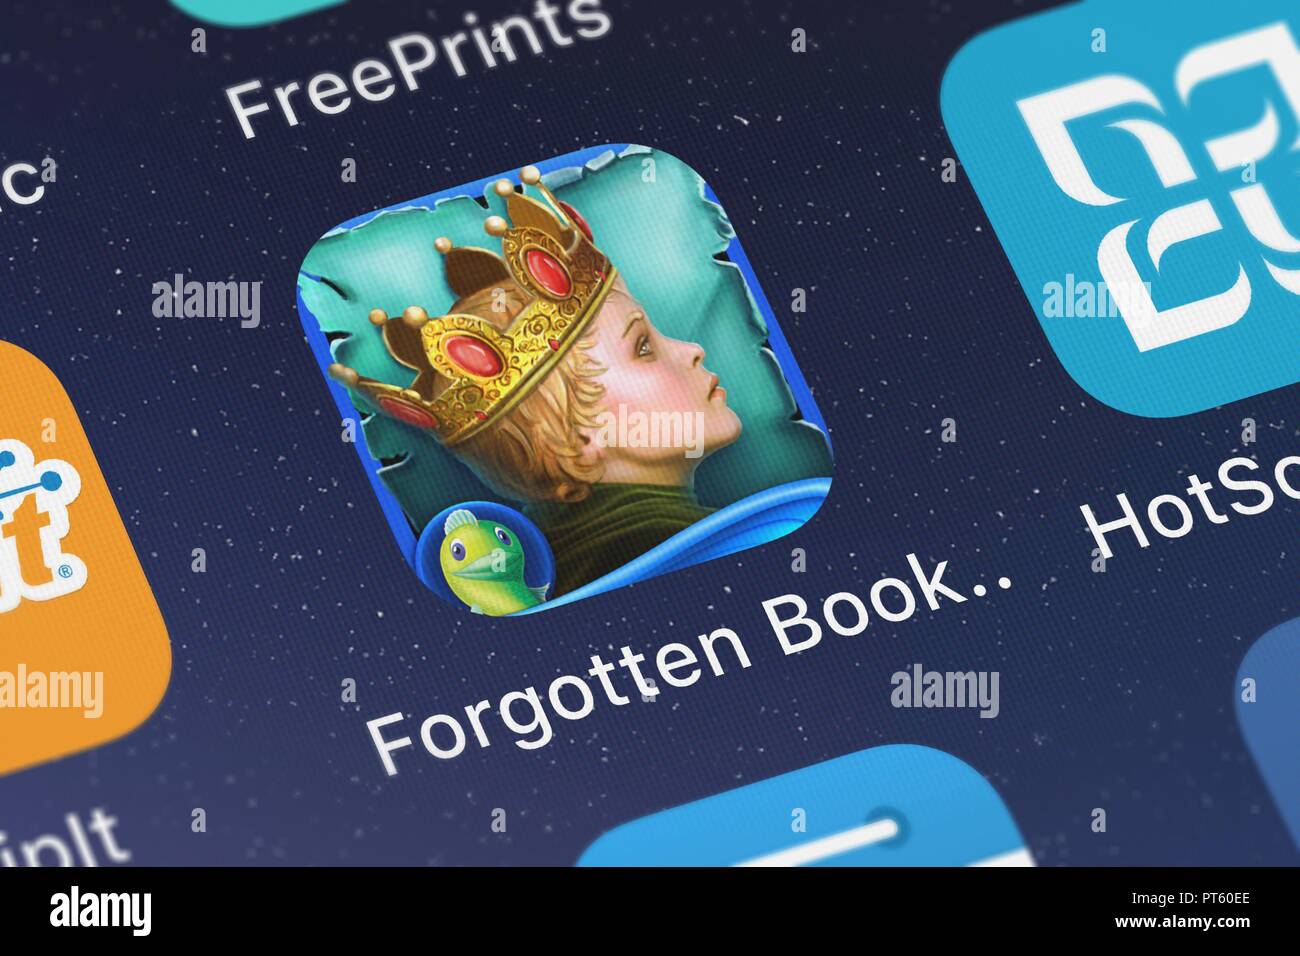 London, United Kingdom - October 06, 2018: The Forgotten Books: The Enchanted Crown HD - A Hidden Object Story Adventure mobile app from Big Fish Game Stock Photo